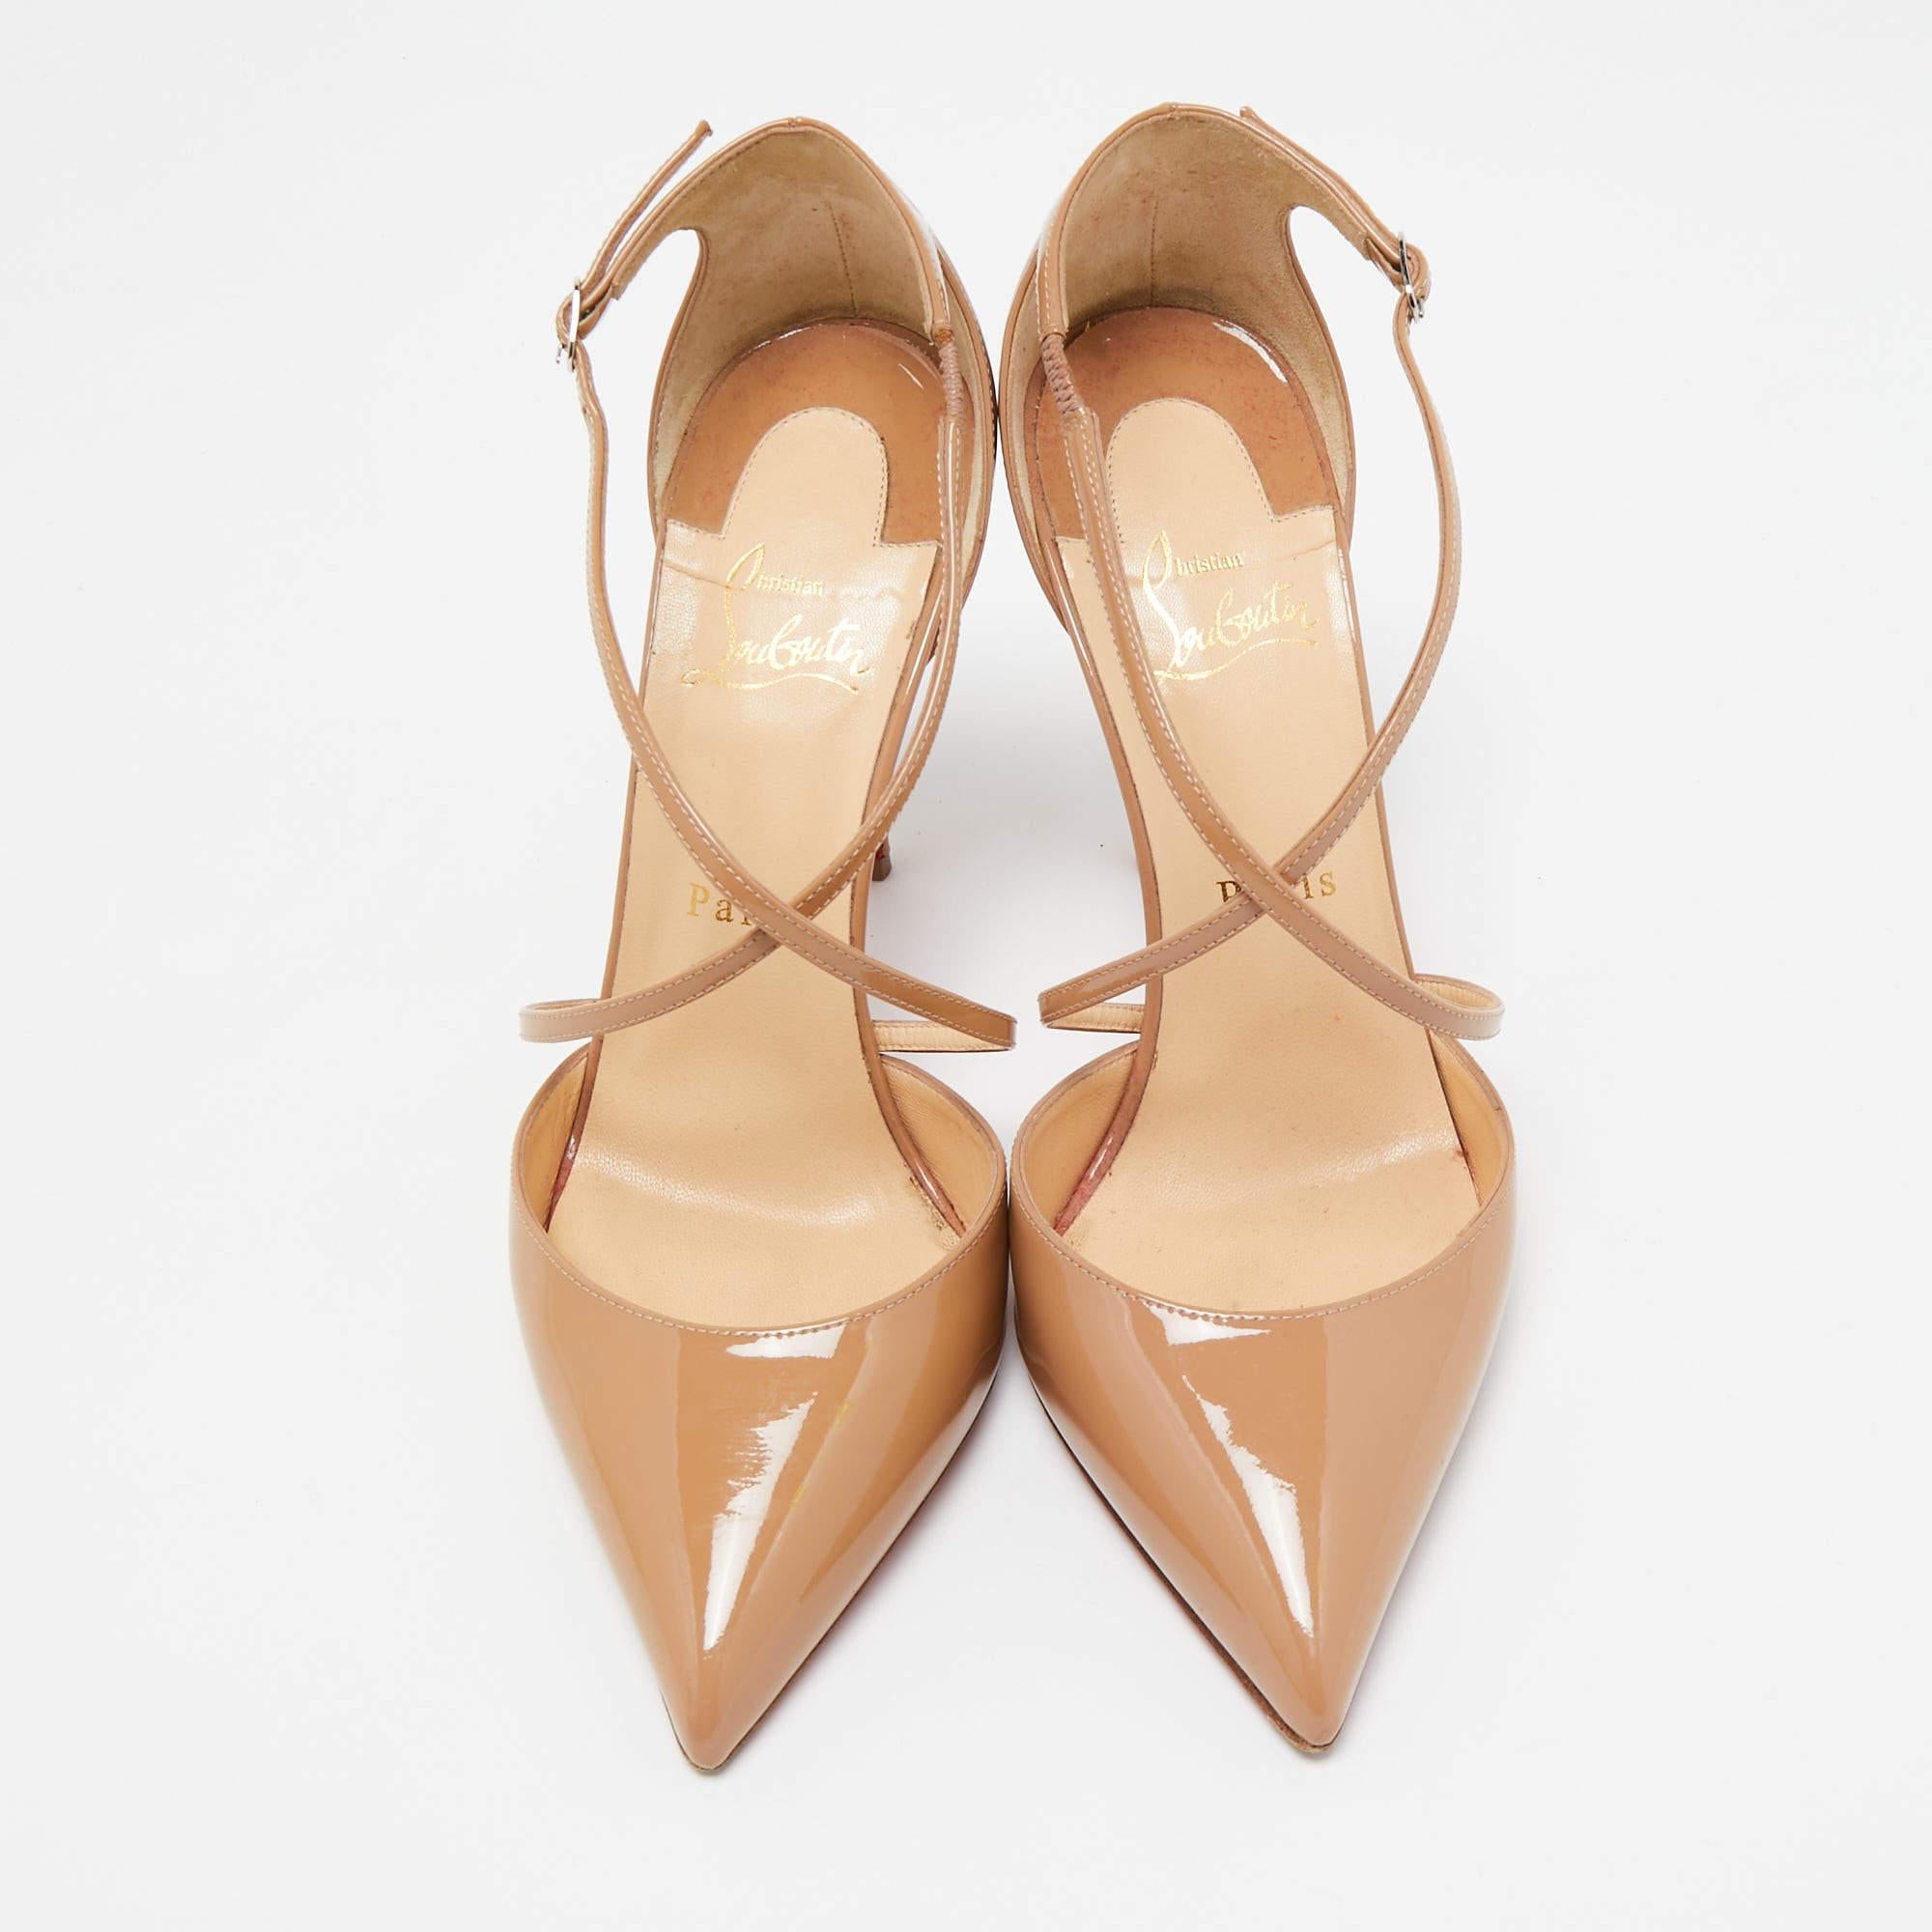 Exhibit an elegant style with this pair of pumps. These elegant shoes are crafted from quality materials. They are set on durable soles and sleek heels.

Includes: Original Dustbag

